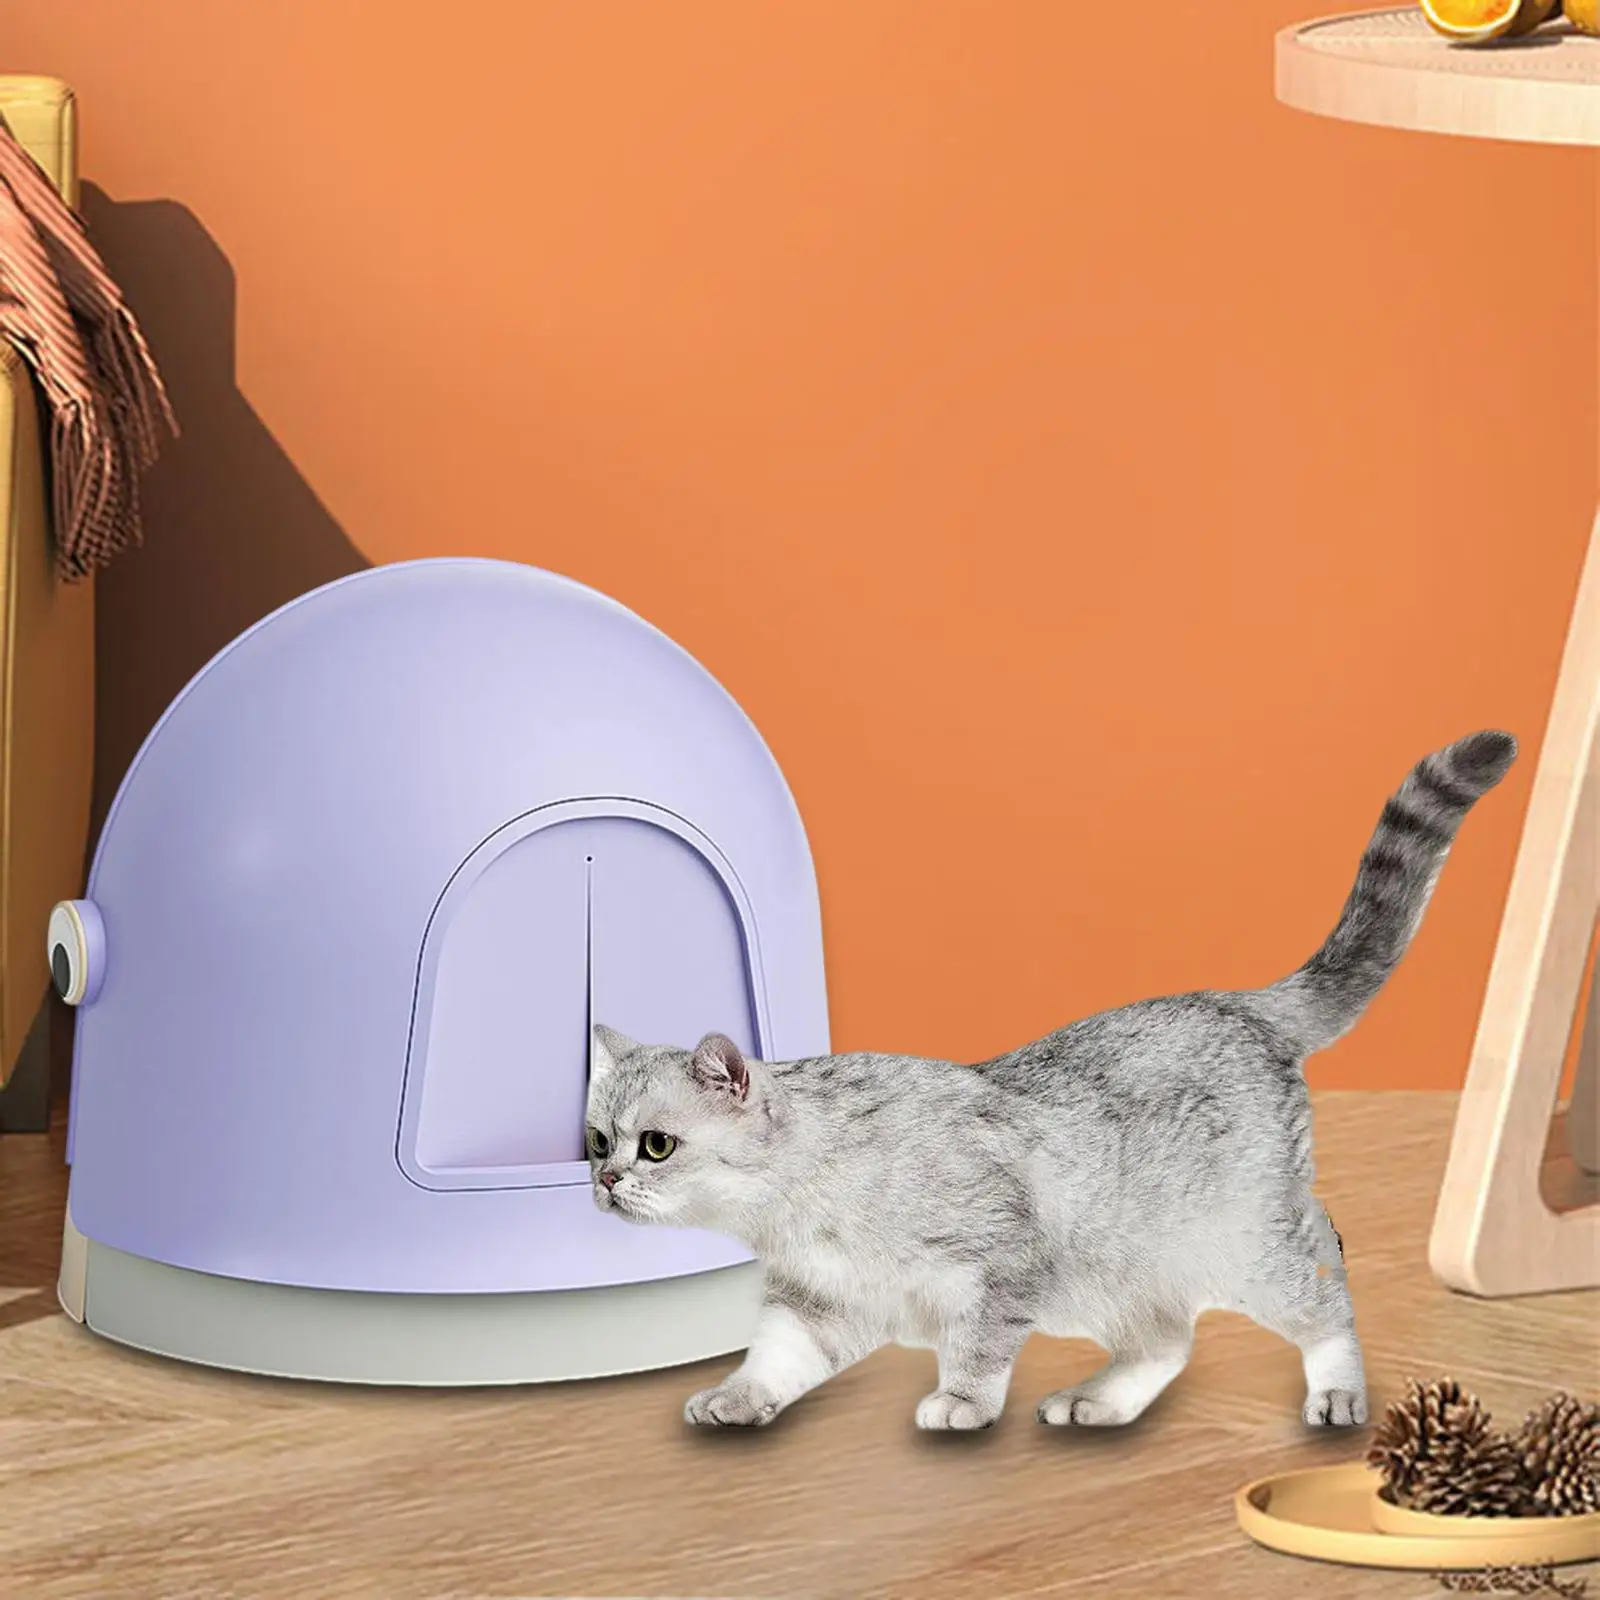 Hooded Large Cat for Indoor Easy to Clean Kitten Toilet Enclosed